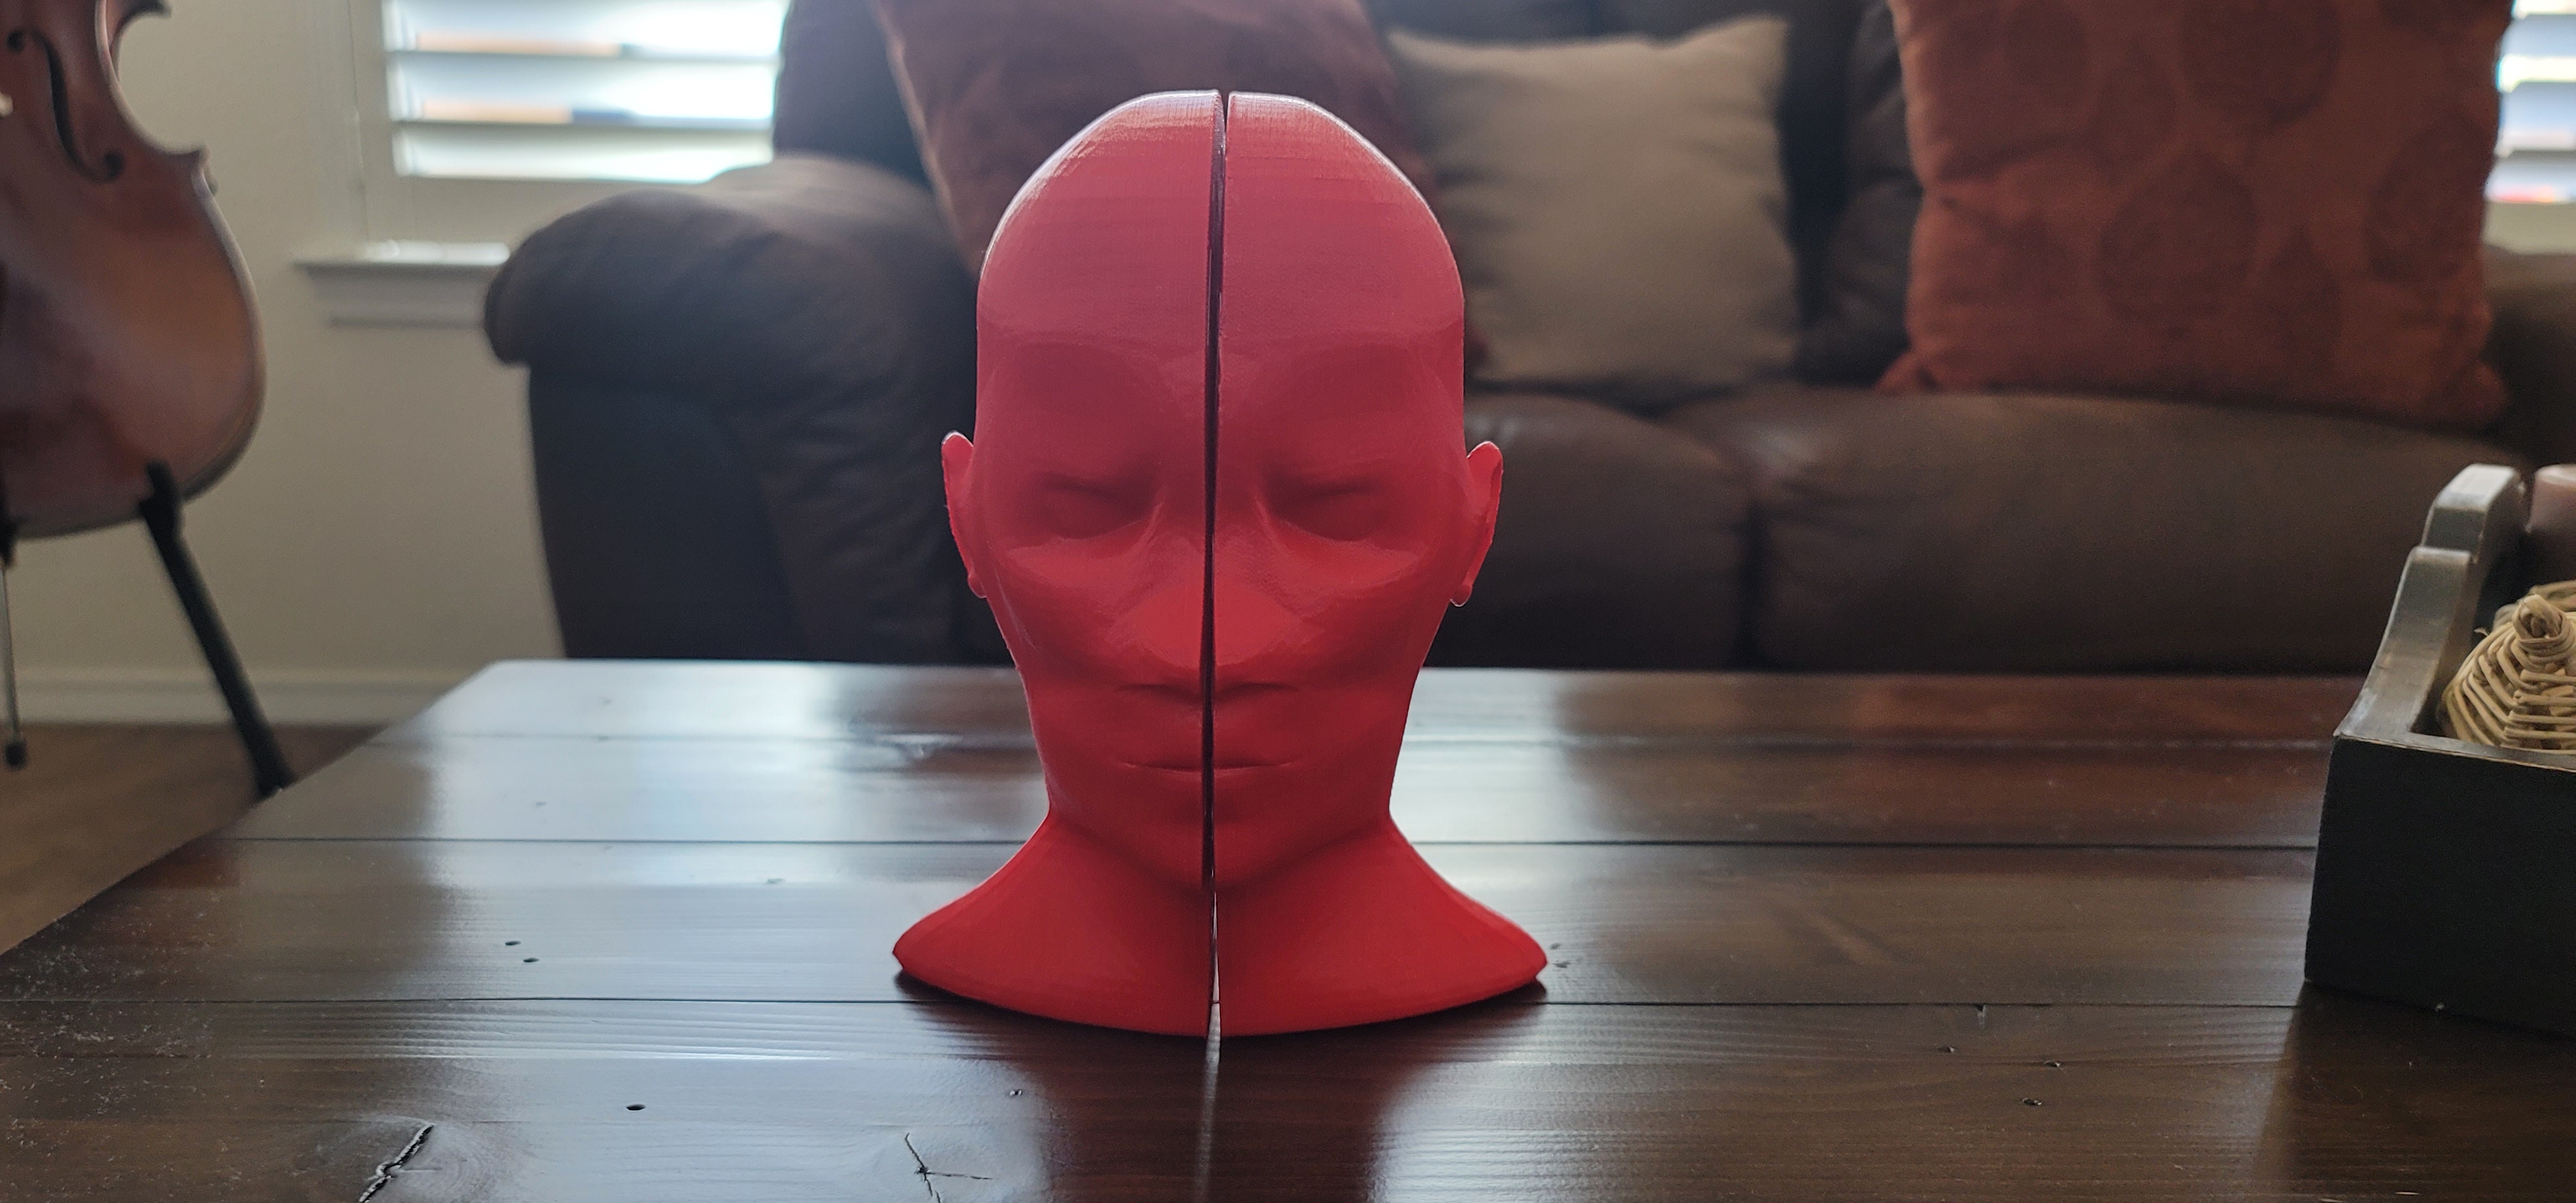 Two 3D printed heads turned outwards to show inside design. 